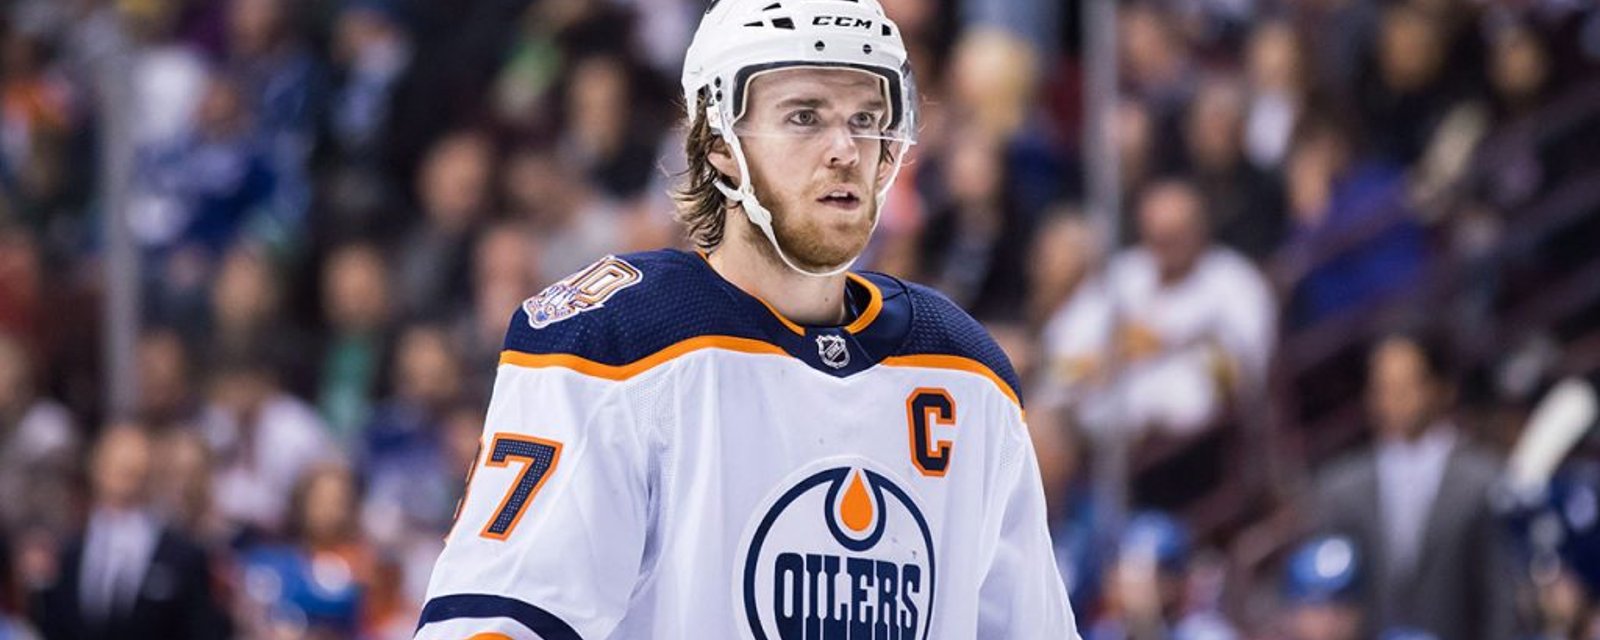 McDavid gets grilled in interview, reacts to rumors saying he wants out of Edmonton 